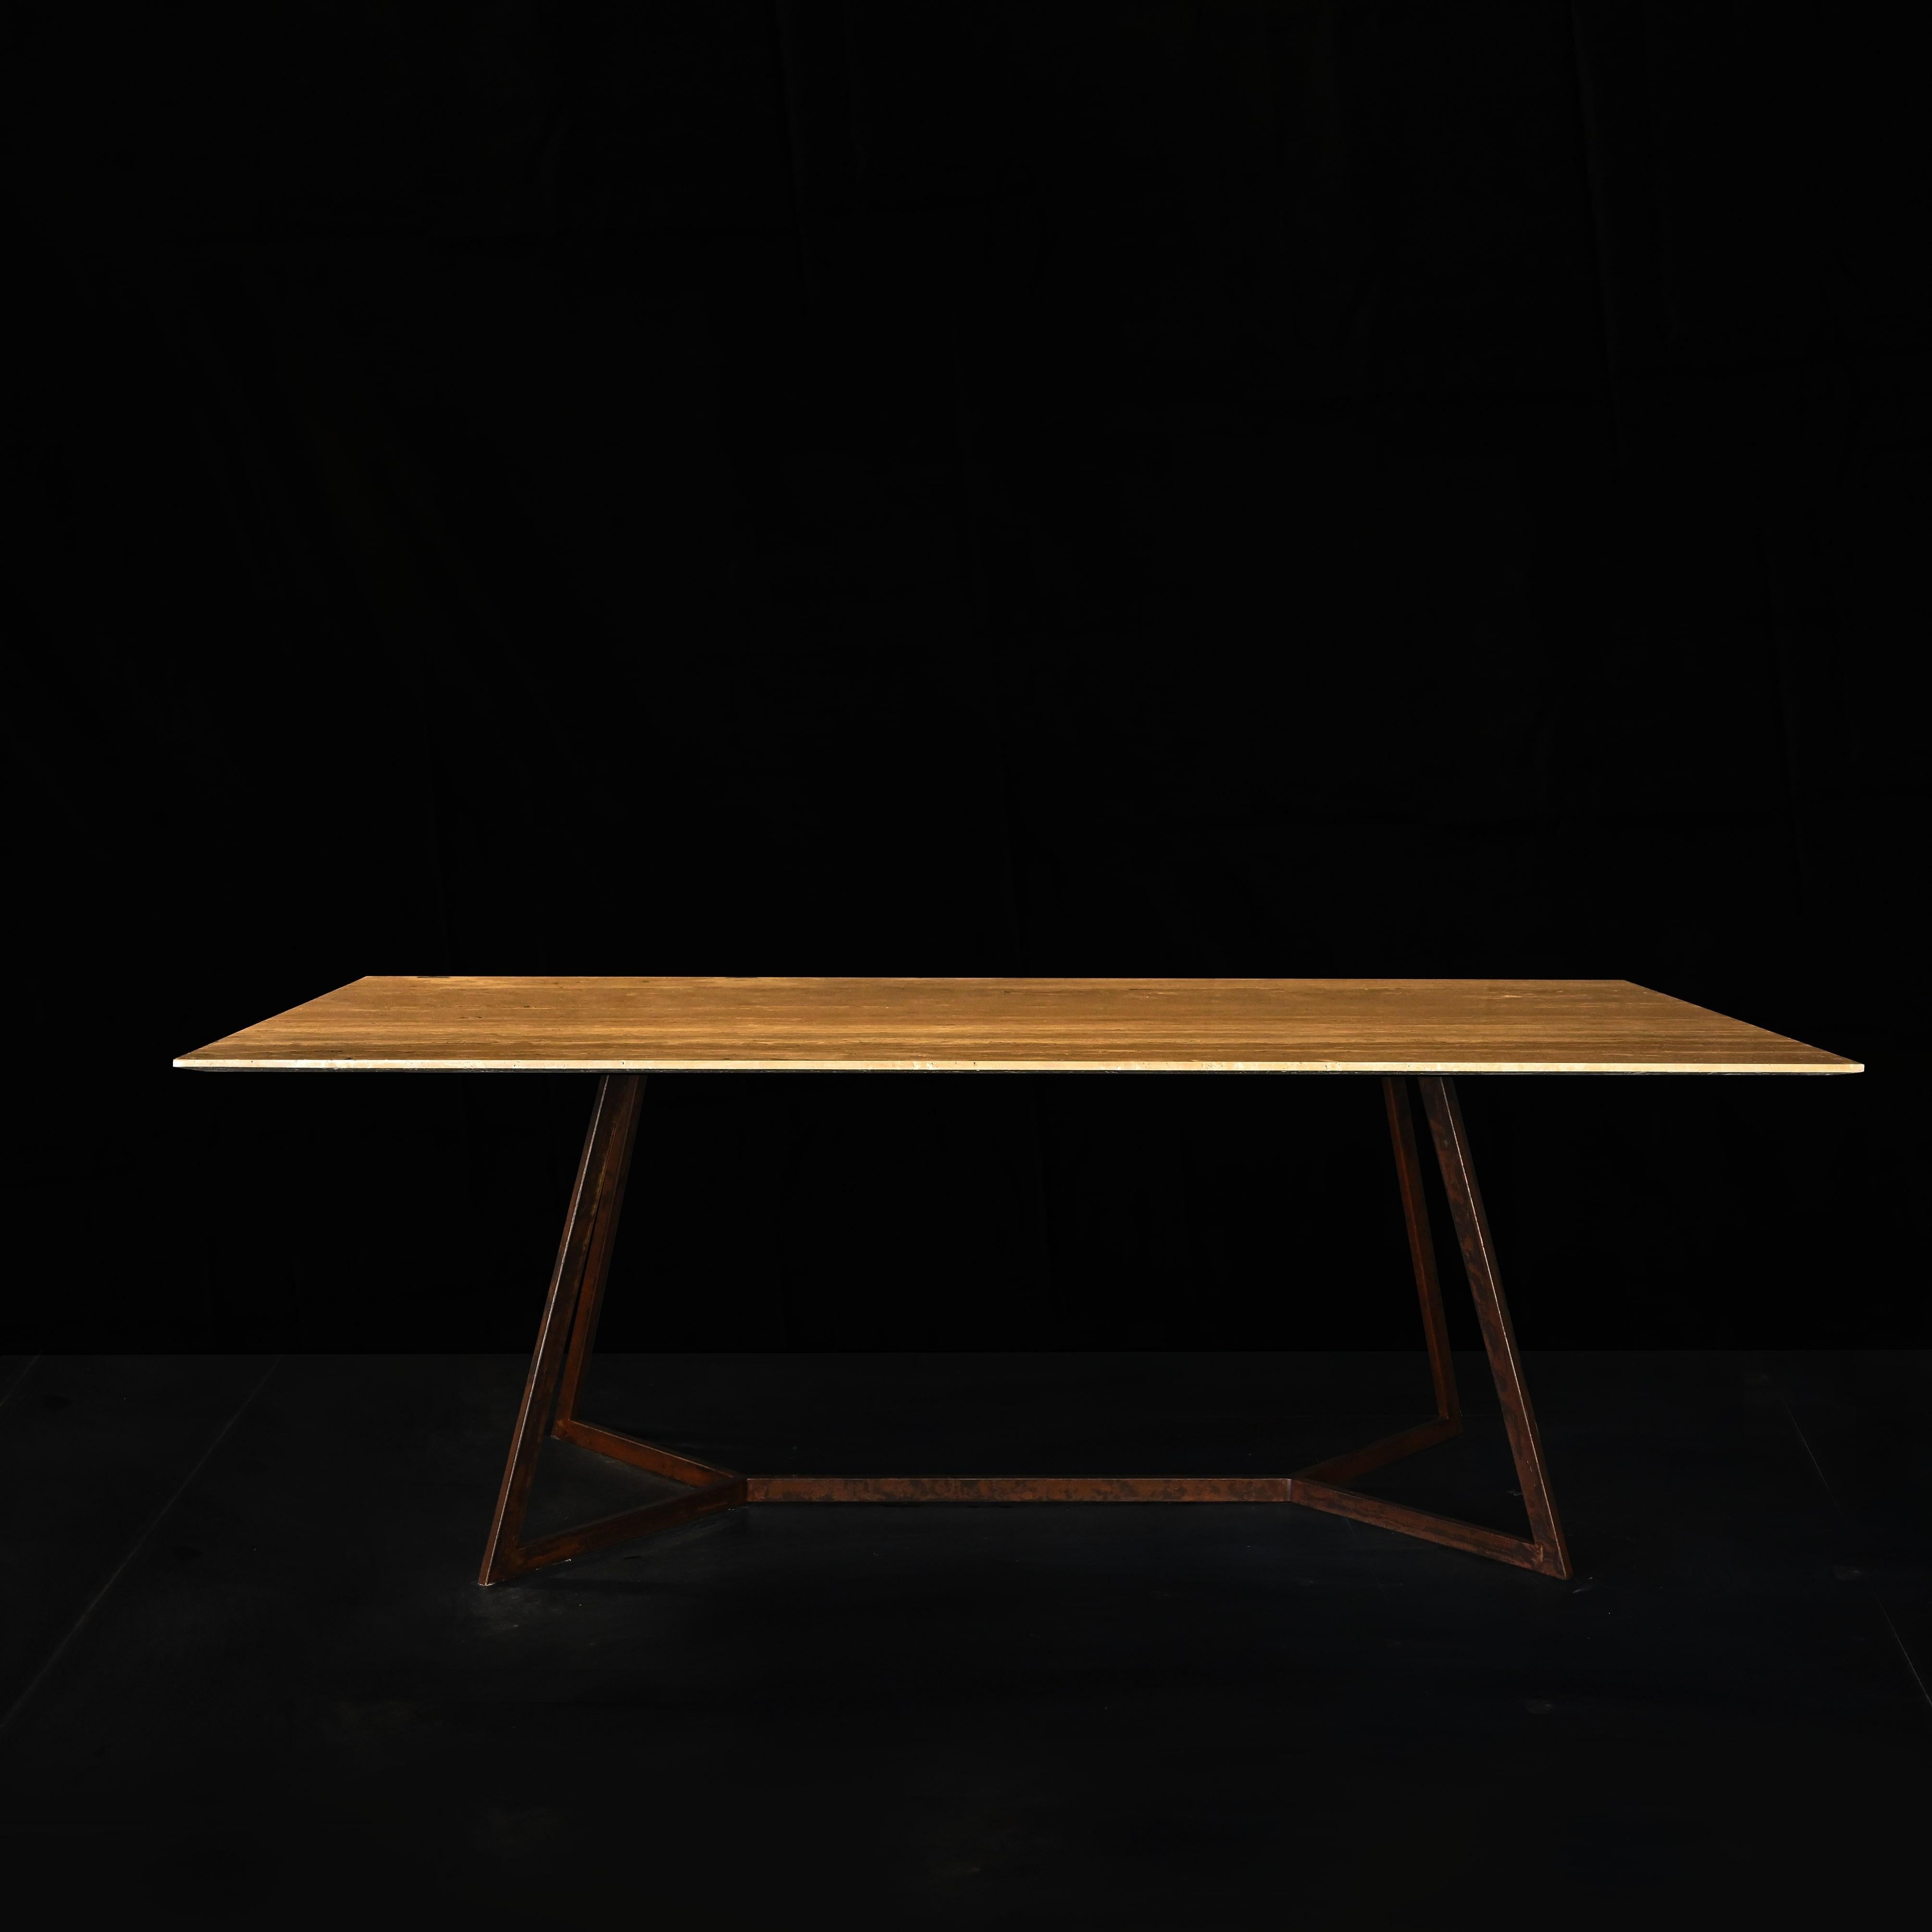 Steel Trapeze Tr4 - Travertine Dining Table and Corten steel By DFdesignlab  For Sale